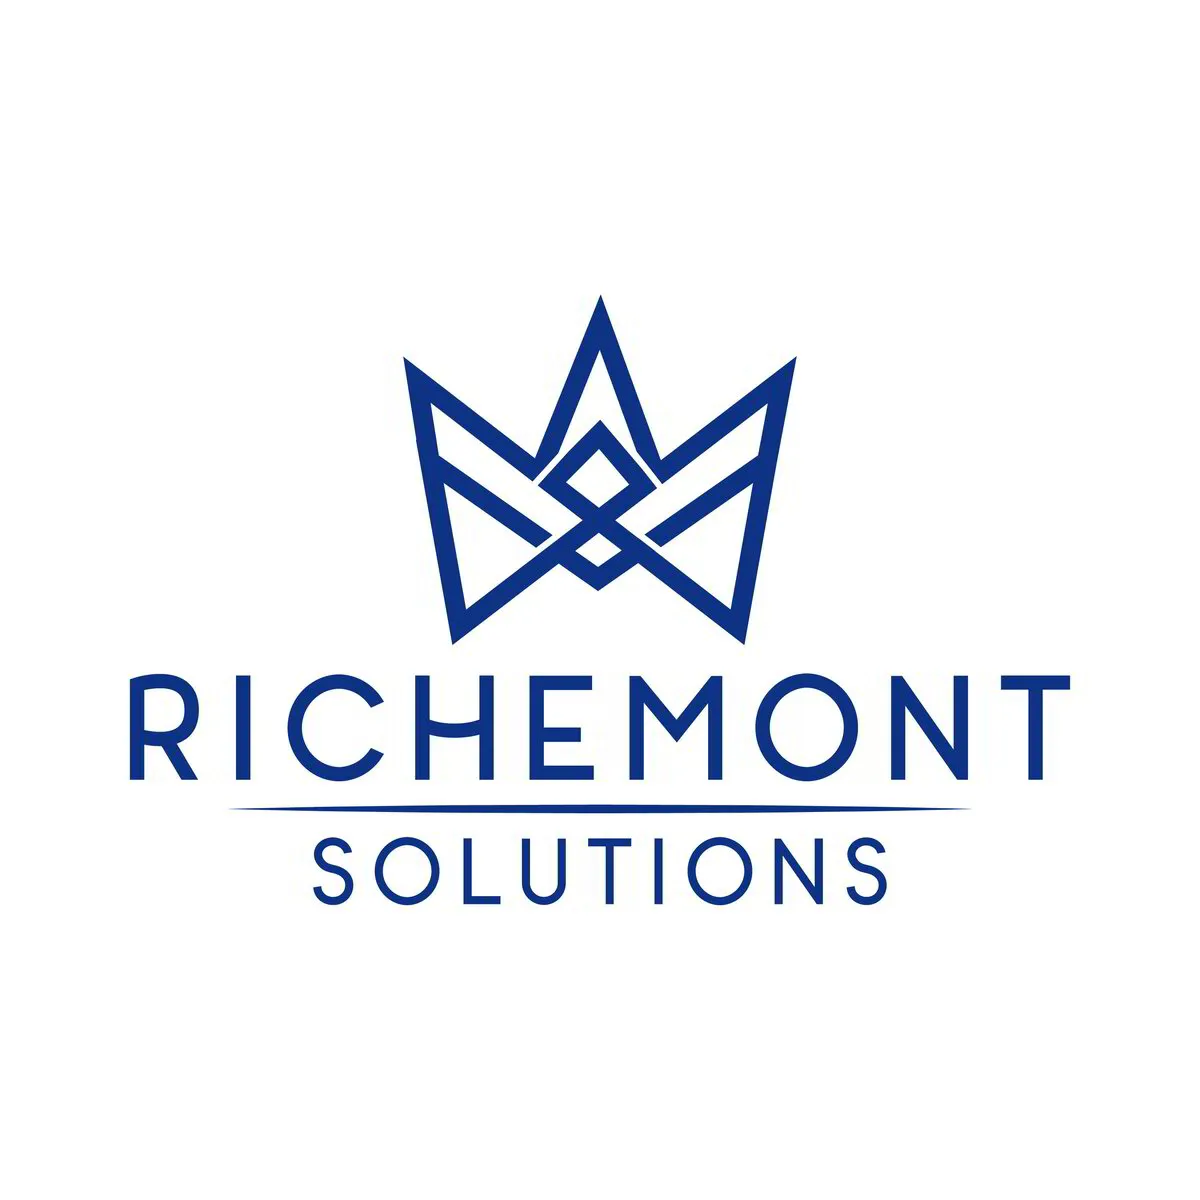 Richemont Solutions